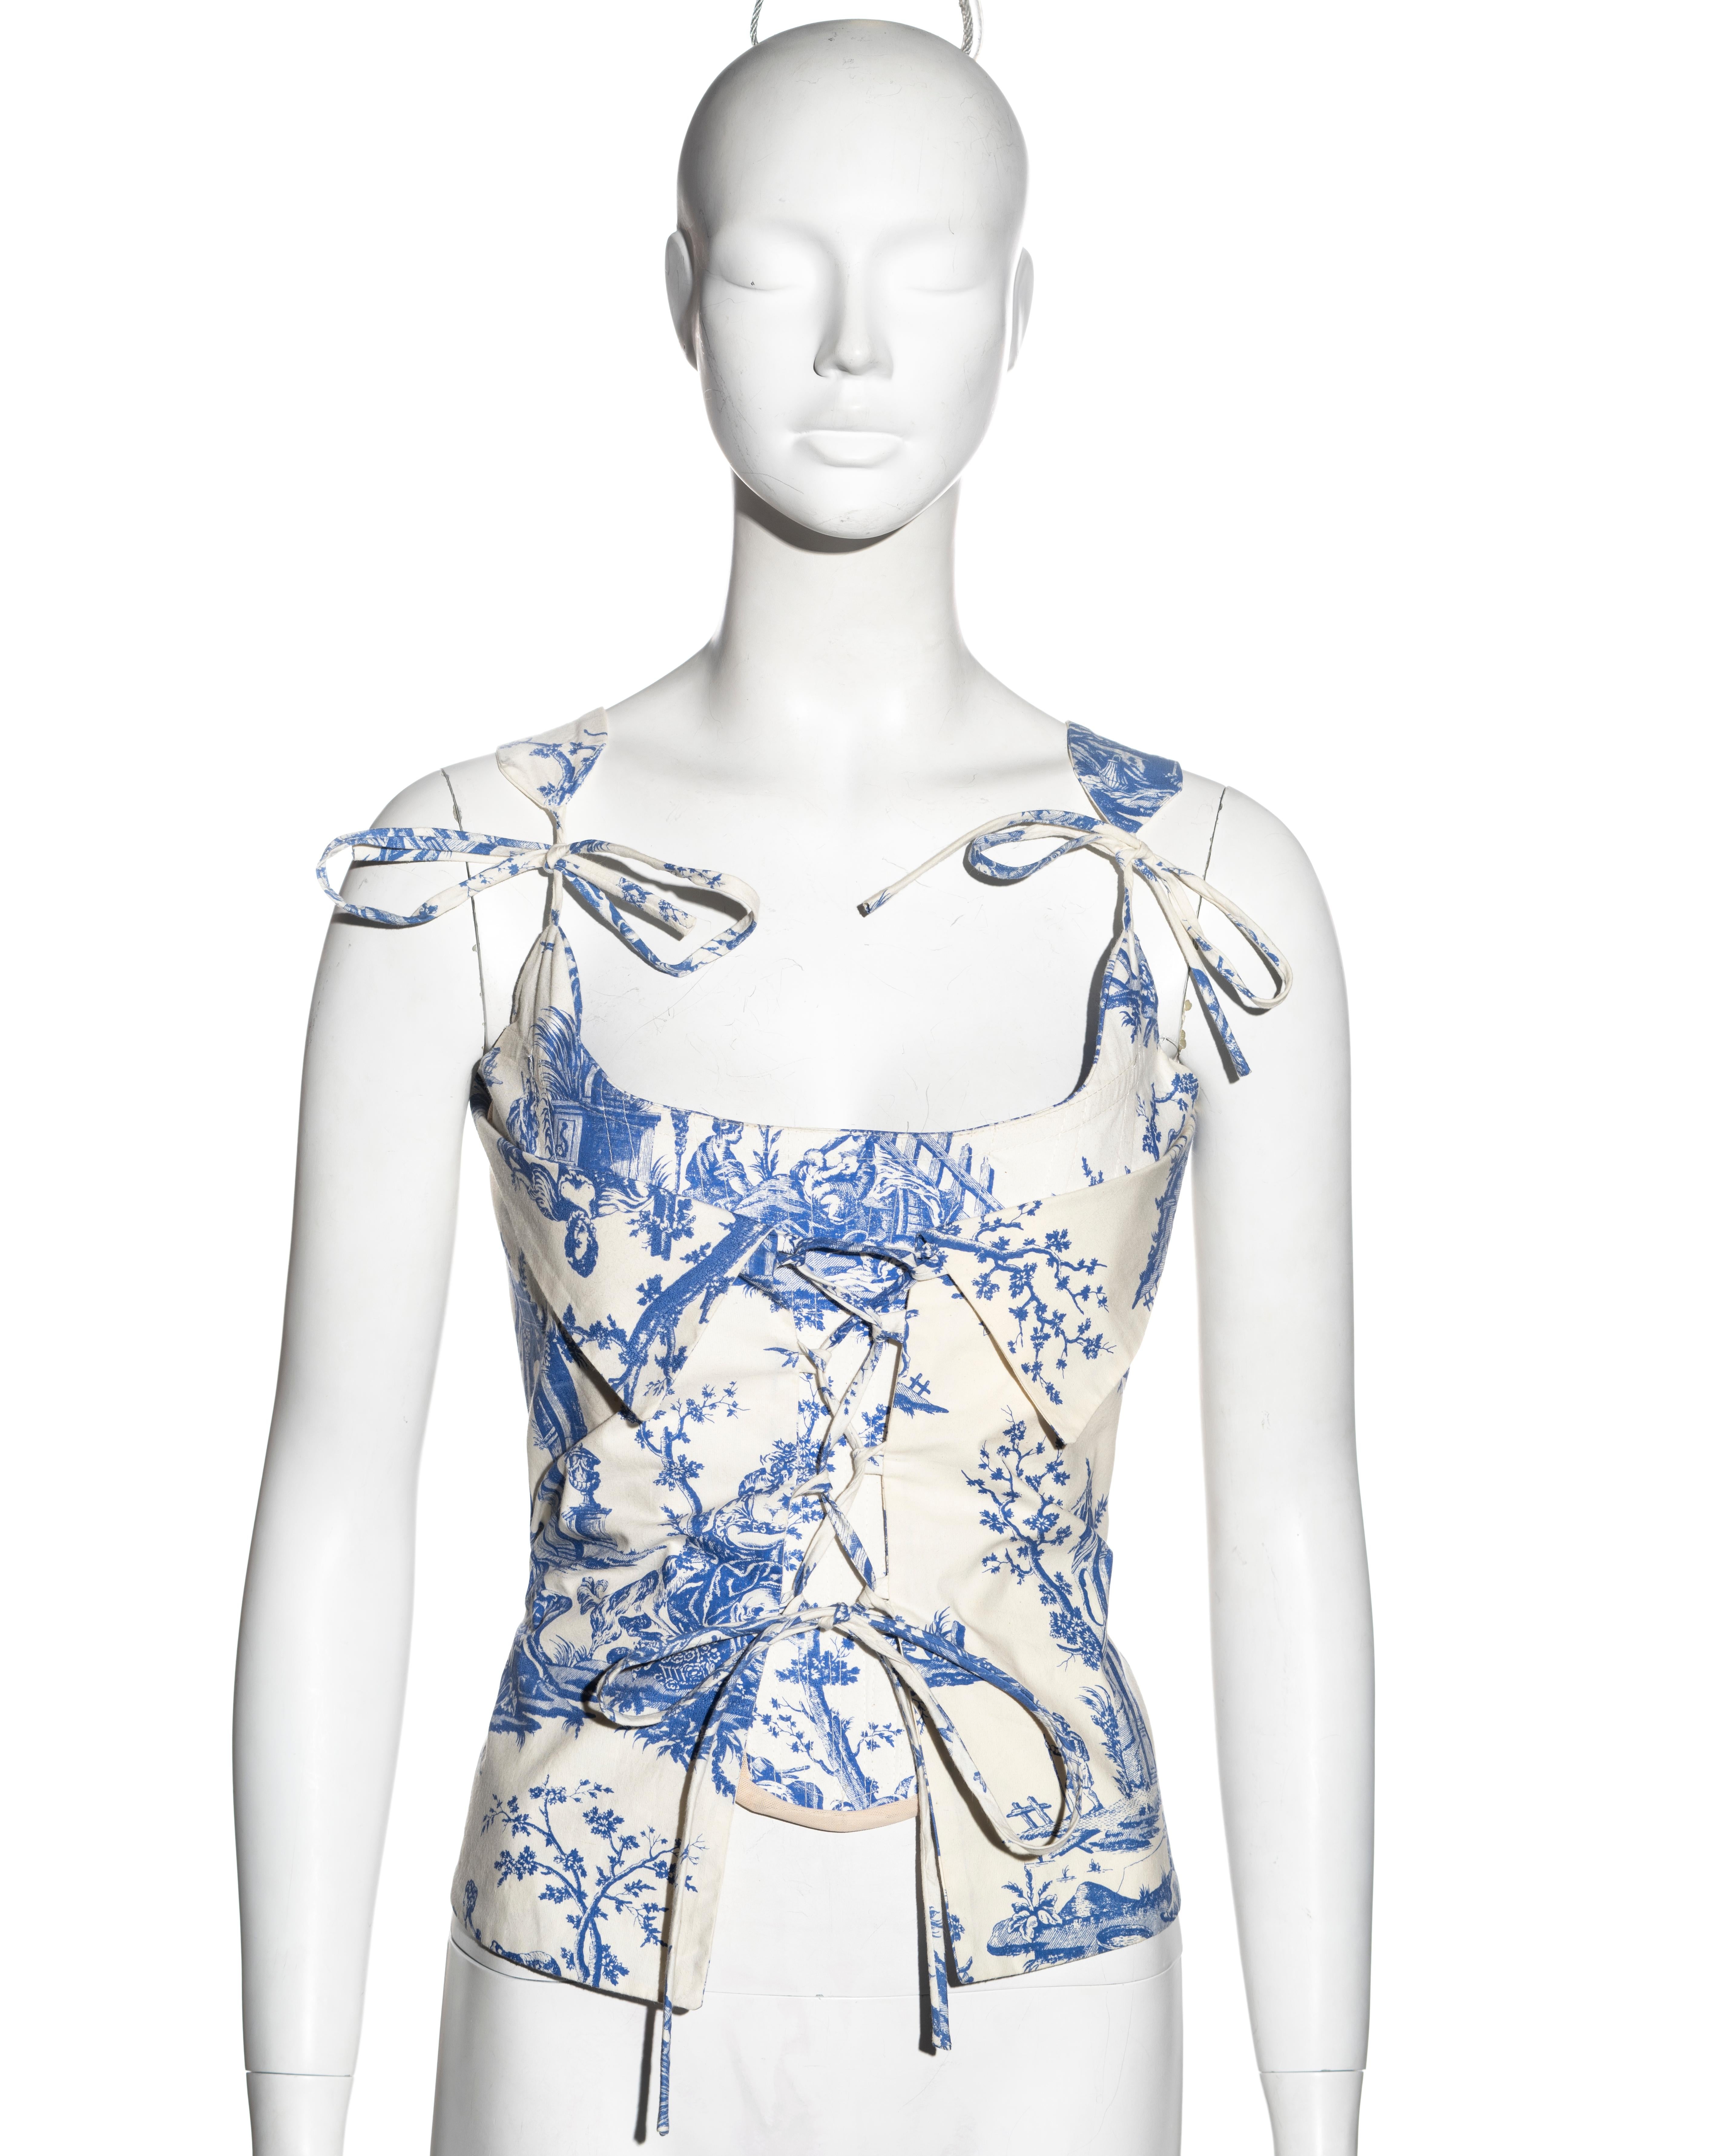 ▪ Vivienne Westwood white cotton corset 
▪ Blue 'Toile de Jouy' print
▪ Boned stomacher 
▪ Matching printed overlay with lace-up fastening and fold-over collar
▪ String ties on the shoulder straps 
▪ Zipper at the centre-back
▪ UK 12
▪ Spring-Summer